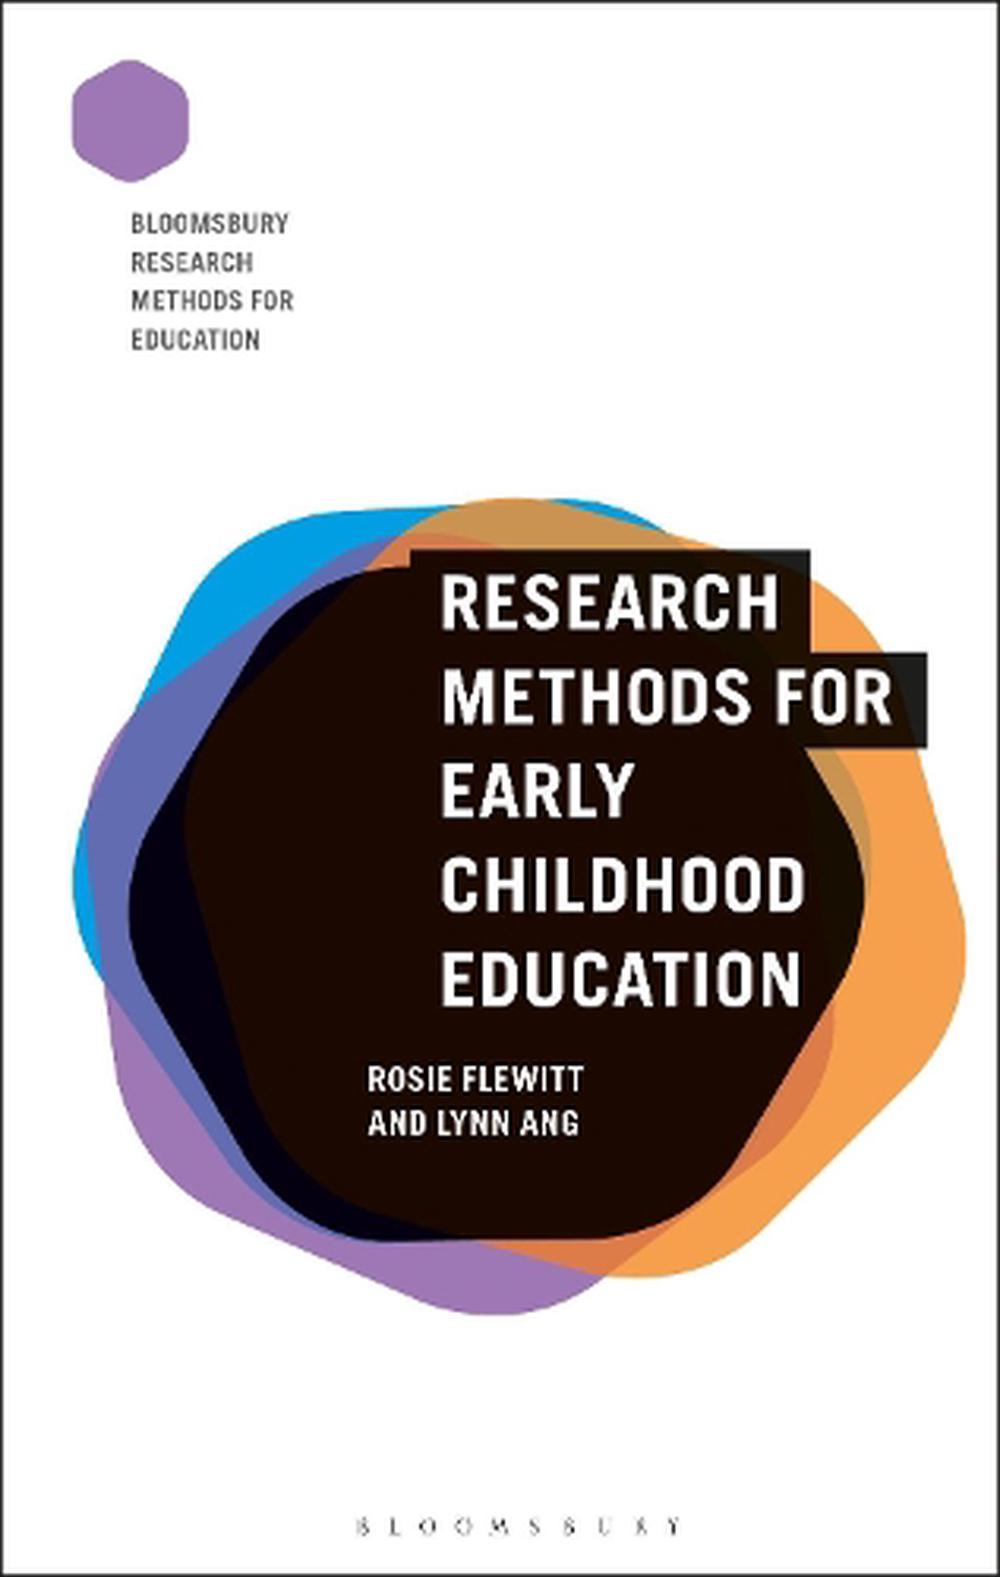 research topics related to childhood education